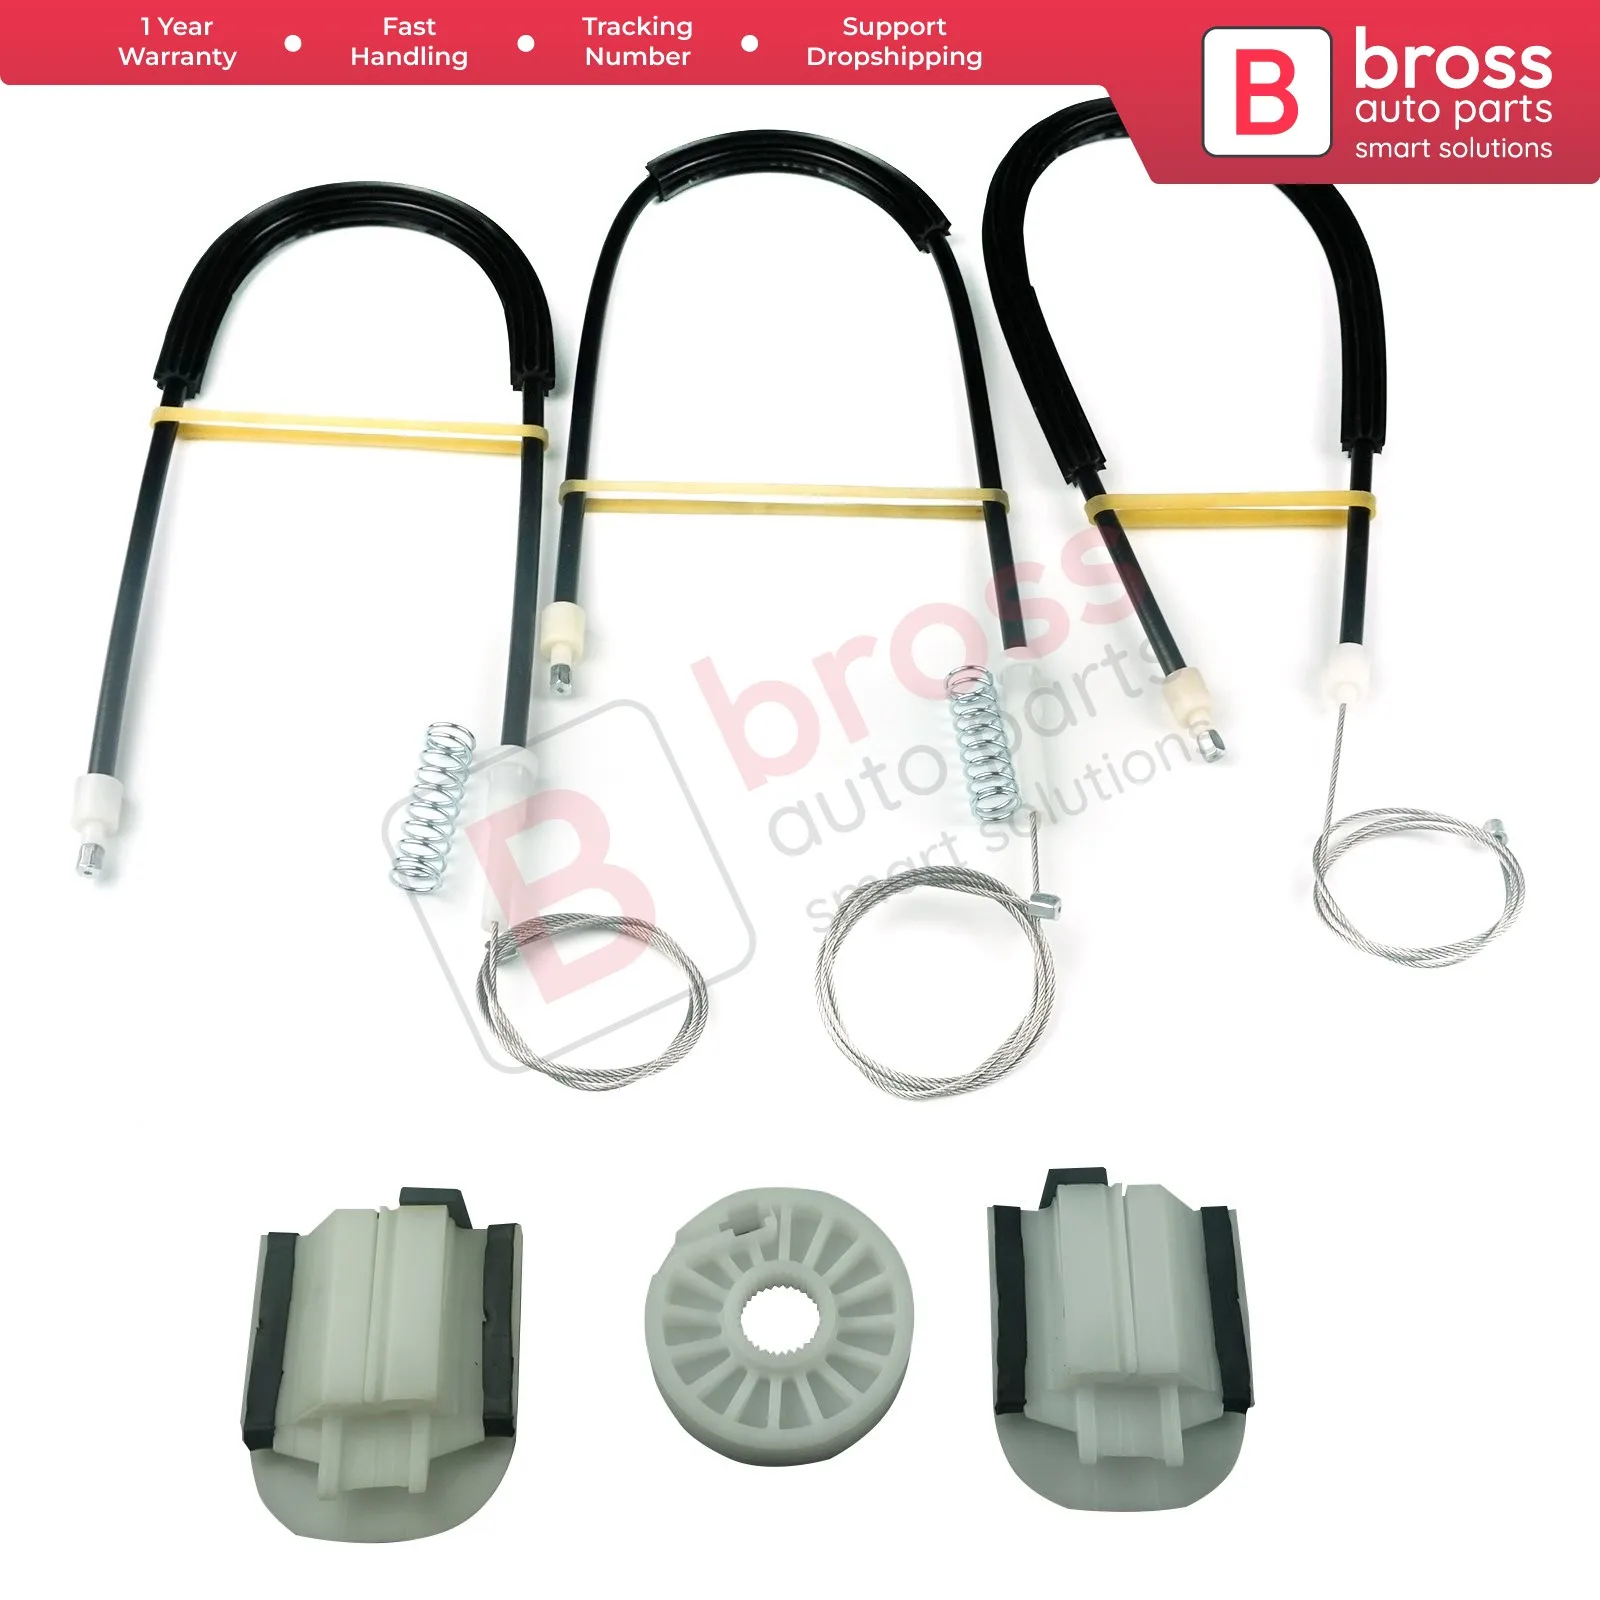 Bross Auto Parts BWR1015 Electrical Power Window Regulator Repair Kit Front Left Door 6M2114A389B for Ford Mondeo MK4 2008-2014